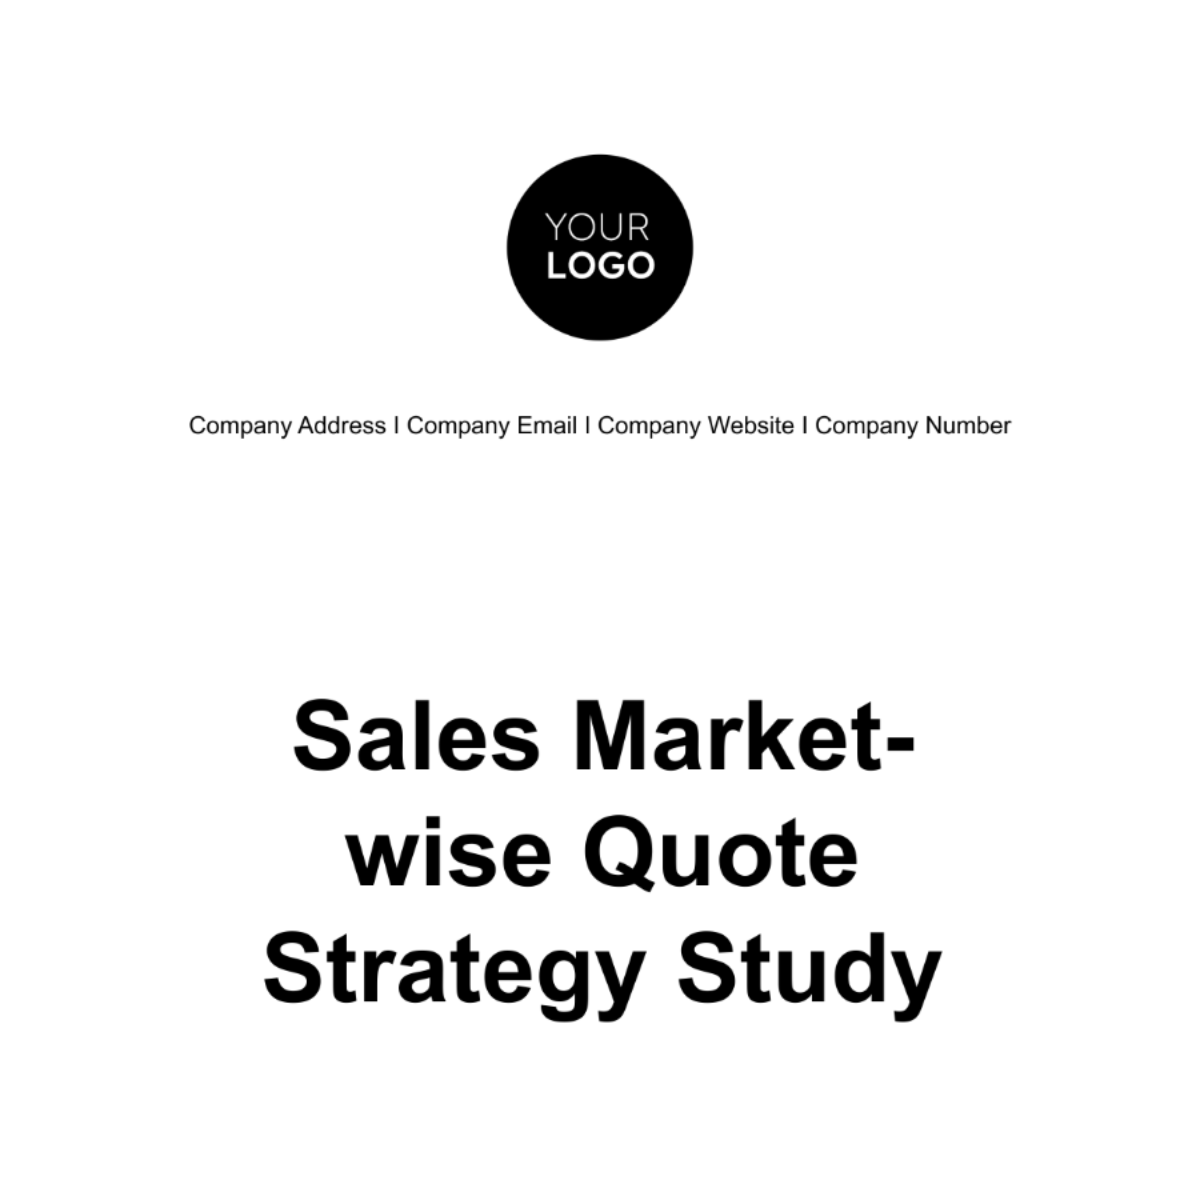 Sales Market-wise Quote Strategy Study Template